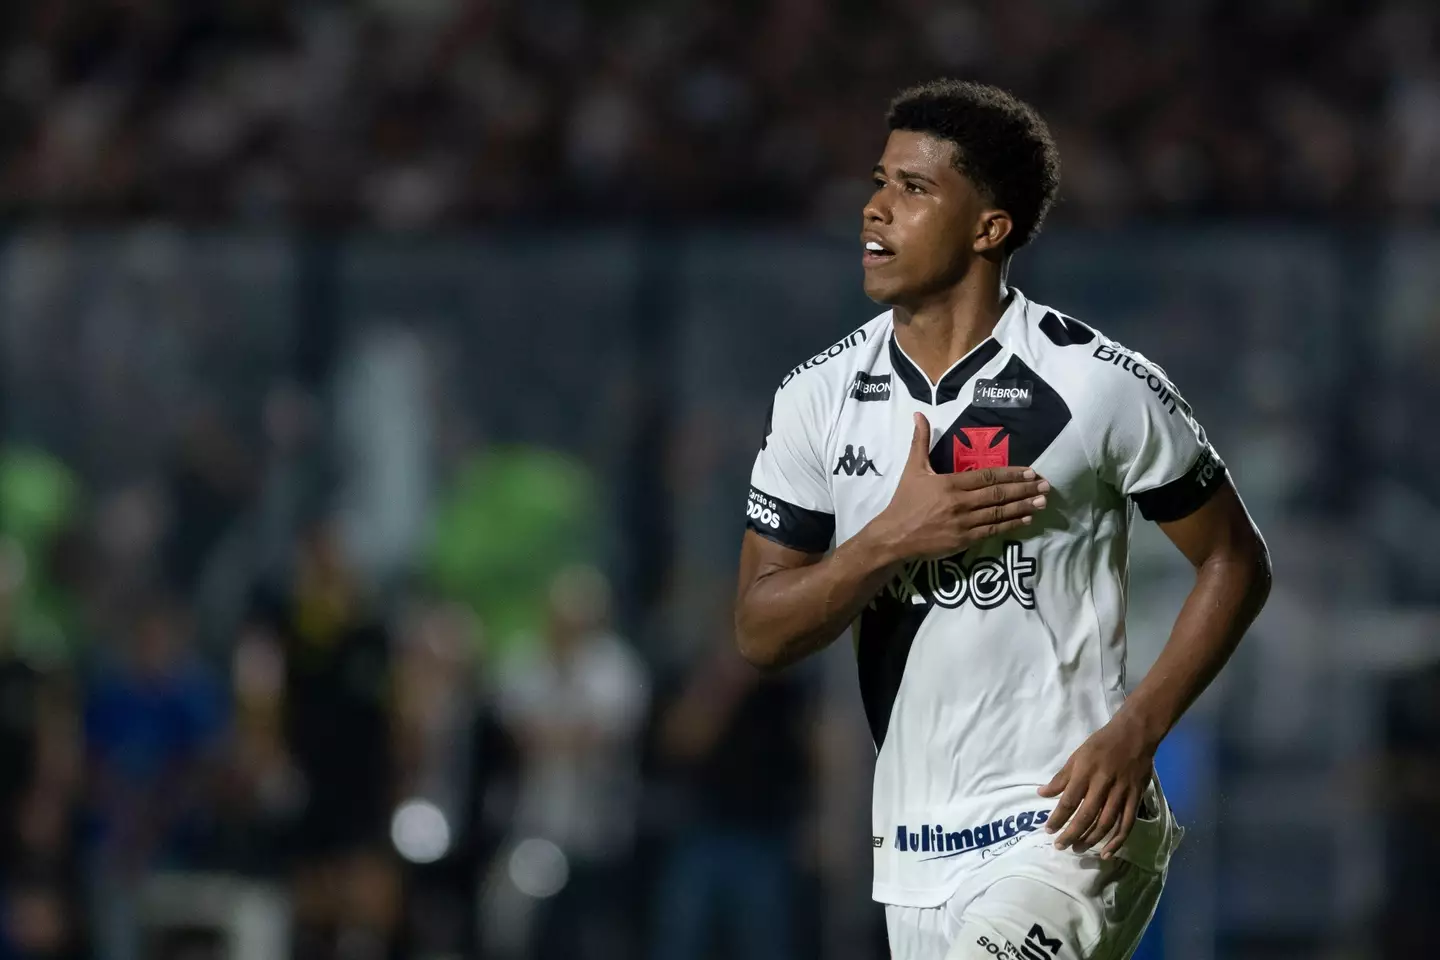 Santos is close to joining Chelsea. (Image